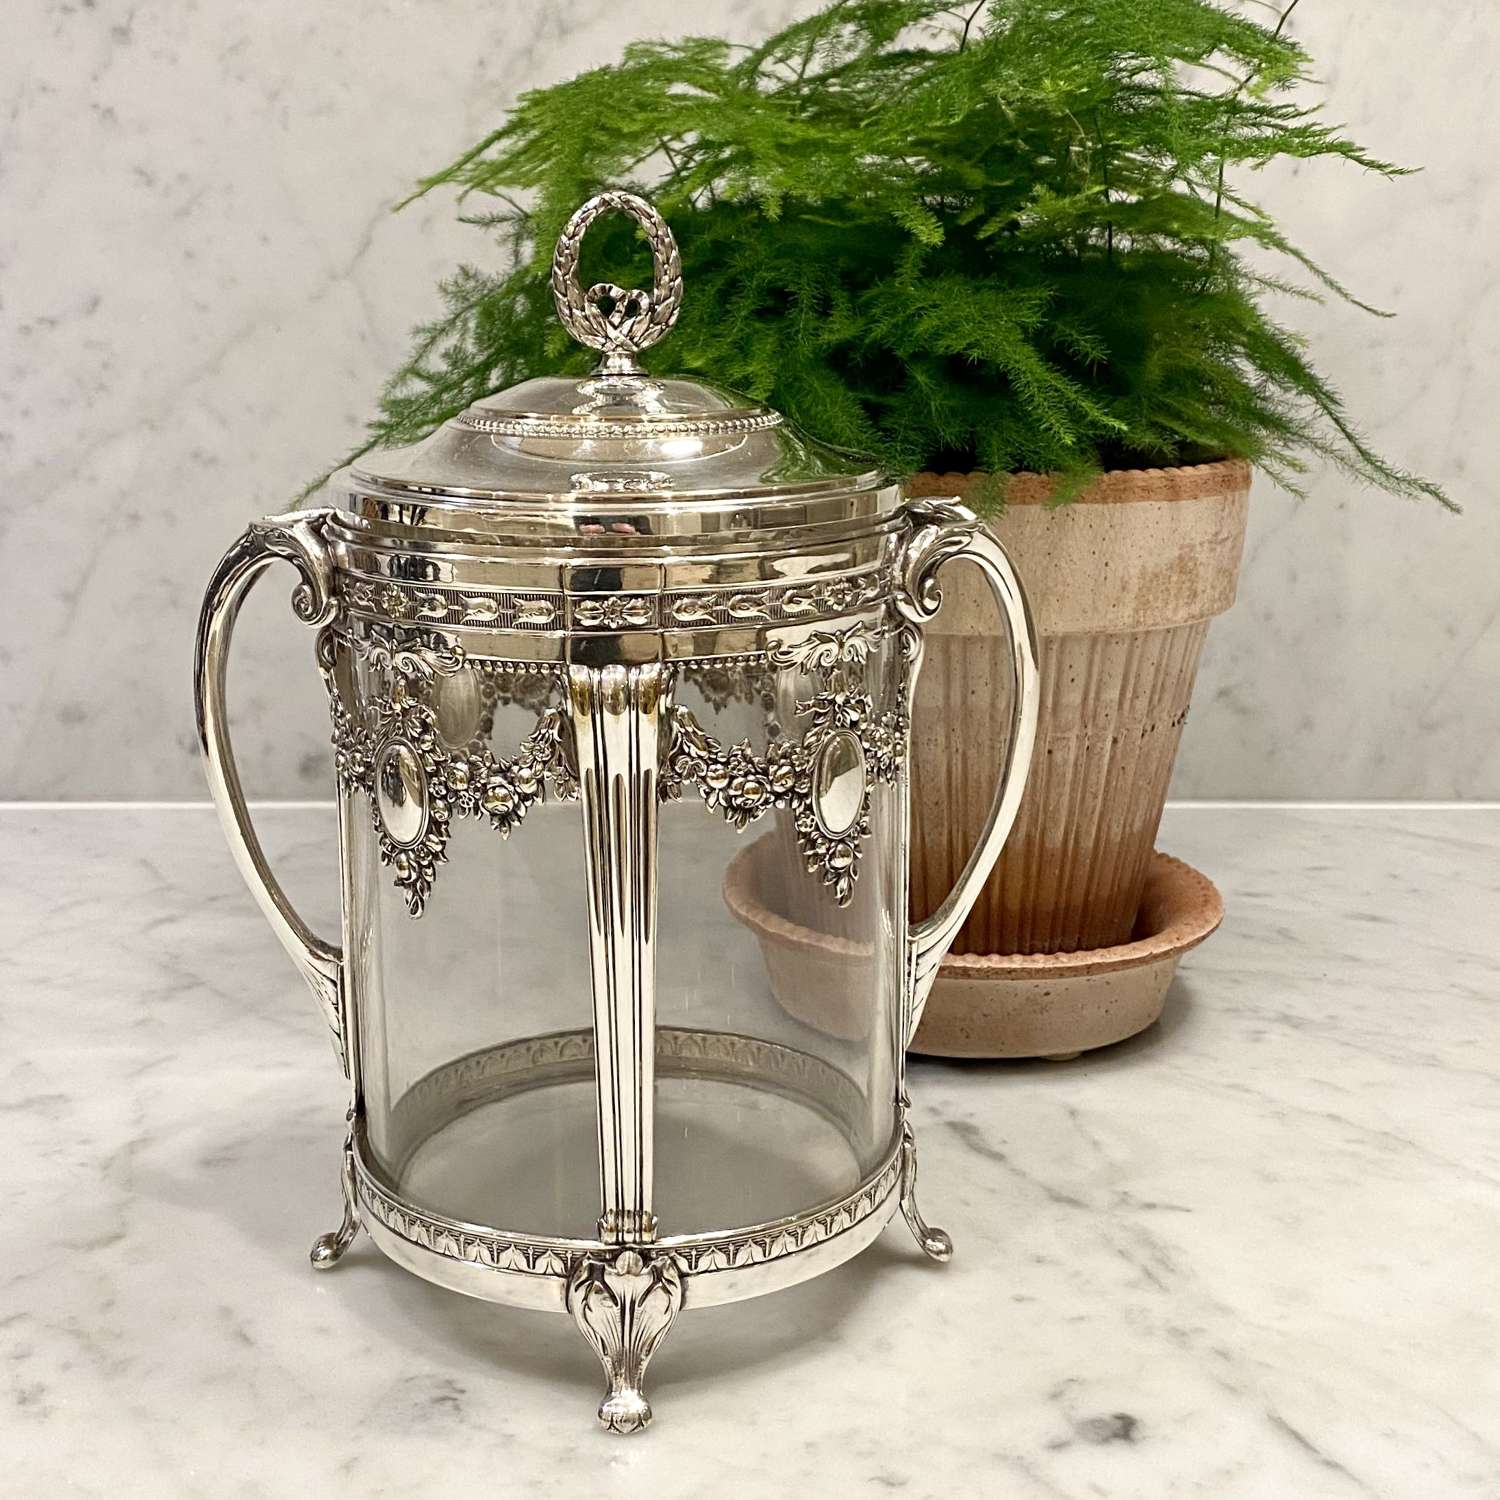 Early WMF silver plated biscuit barrel or ice bucket